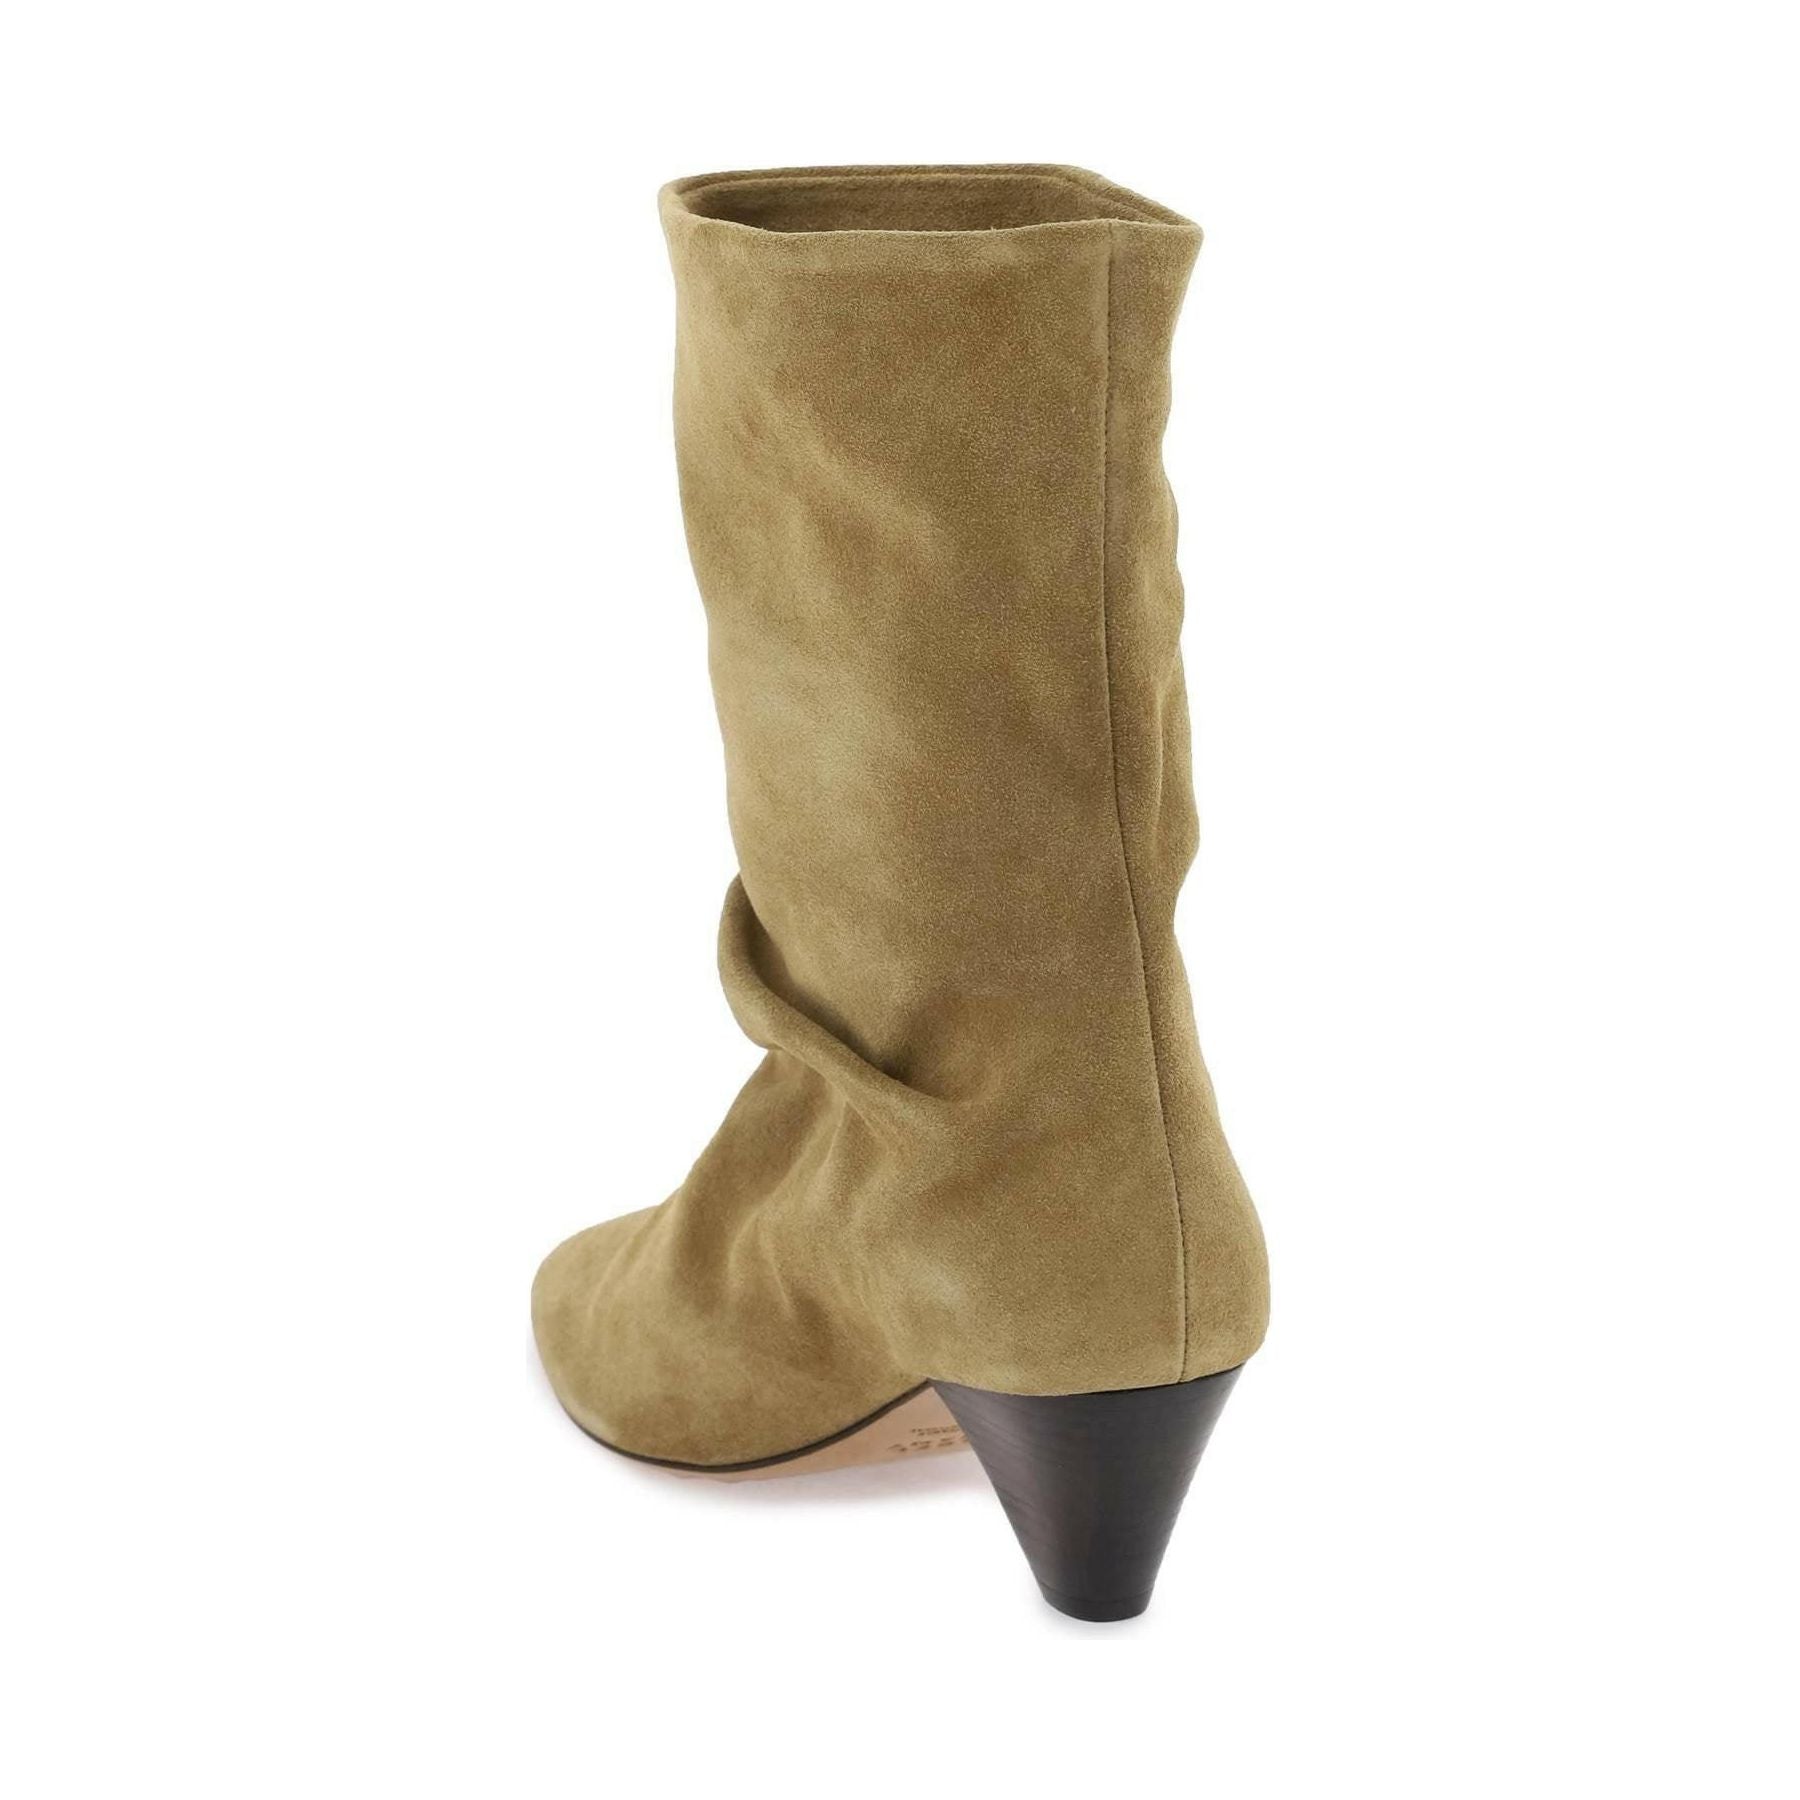 Taupe Suede Reachi Ankle Boots ISABEL MARANT JOHN JULIA.